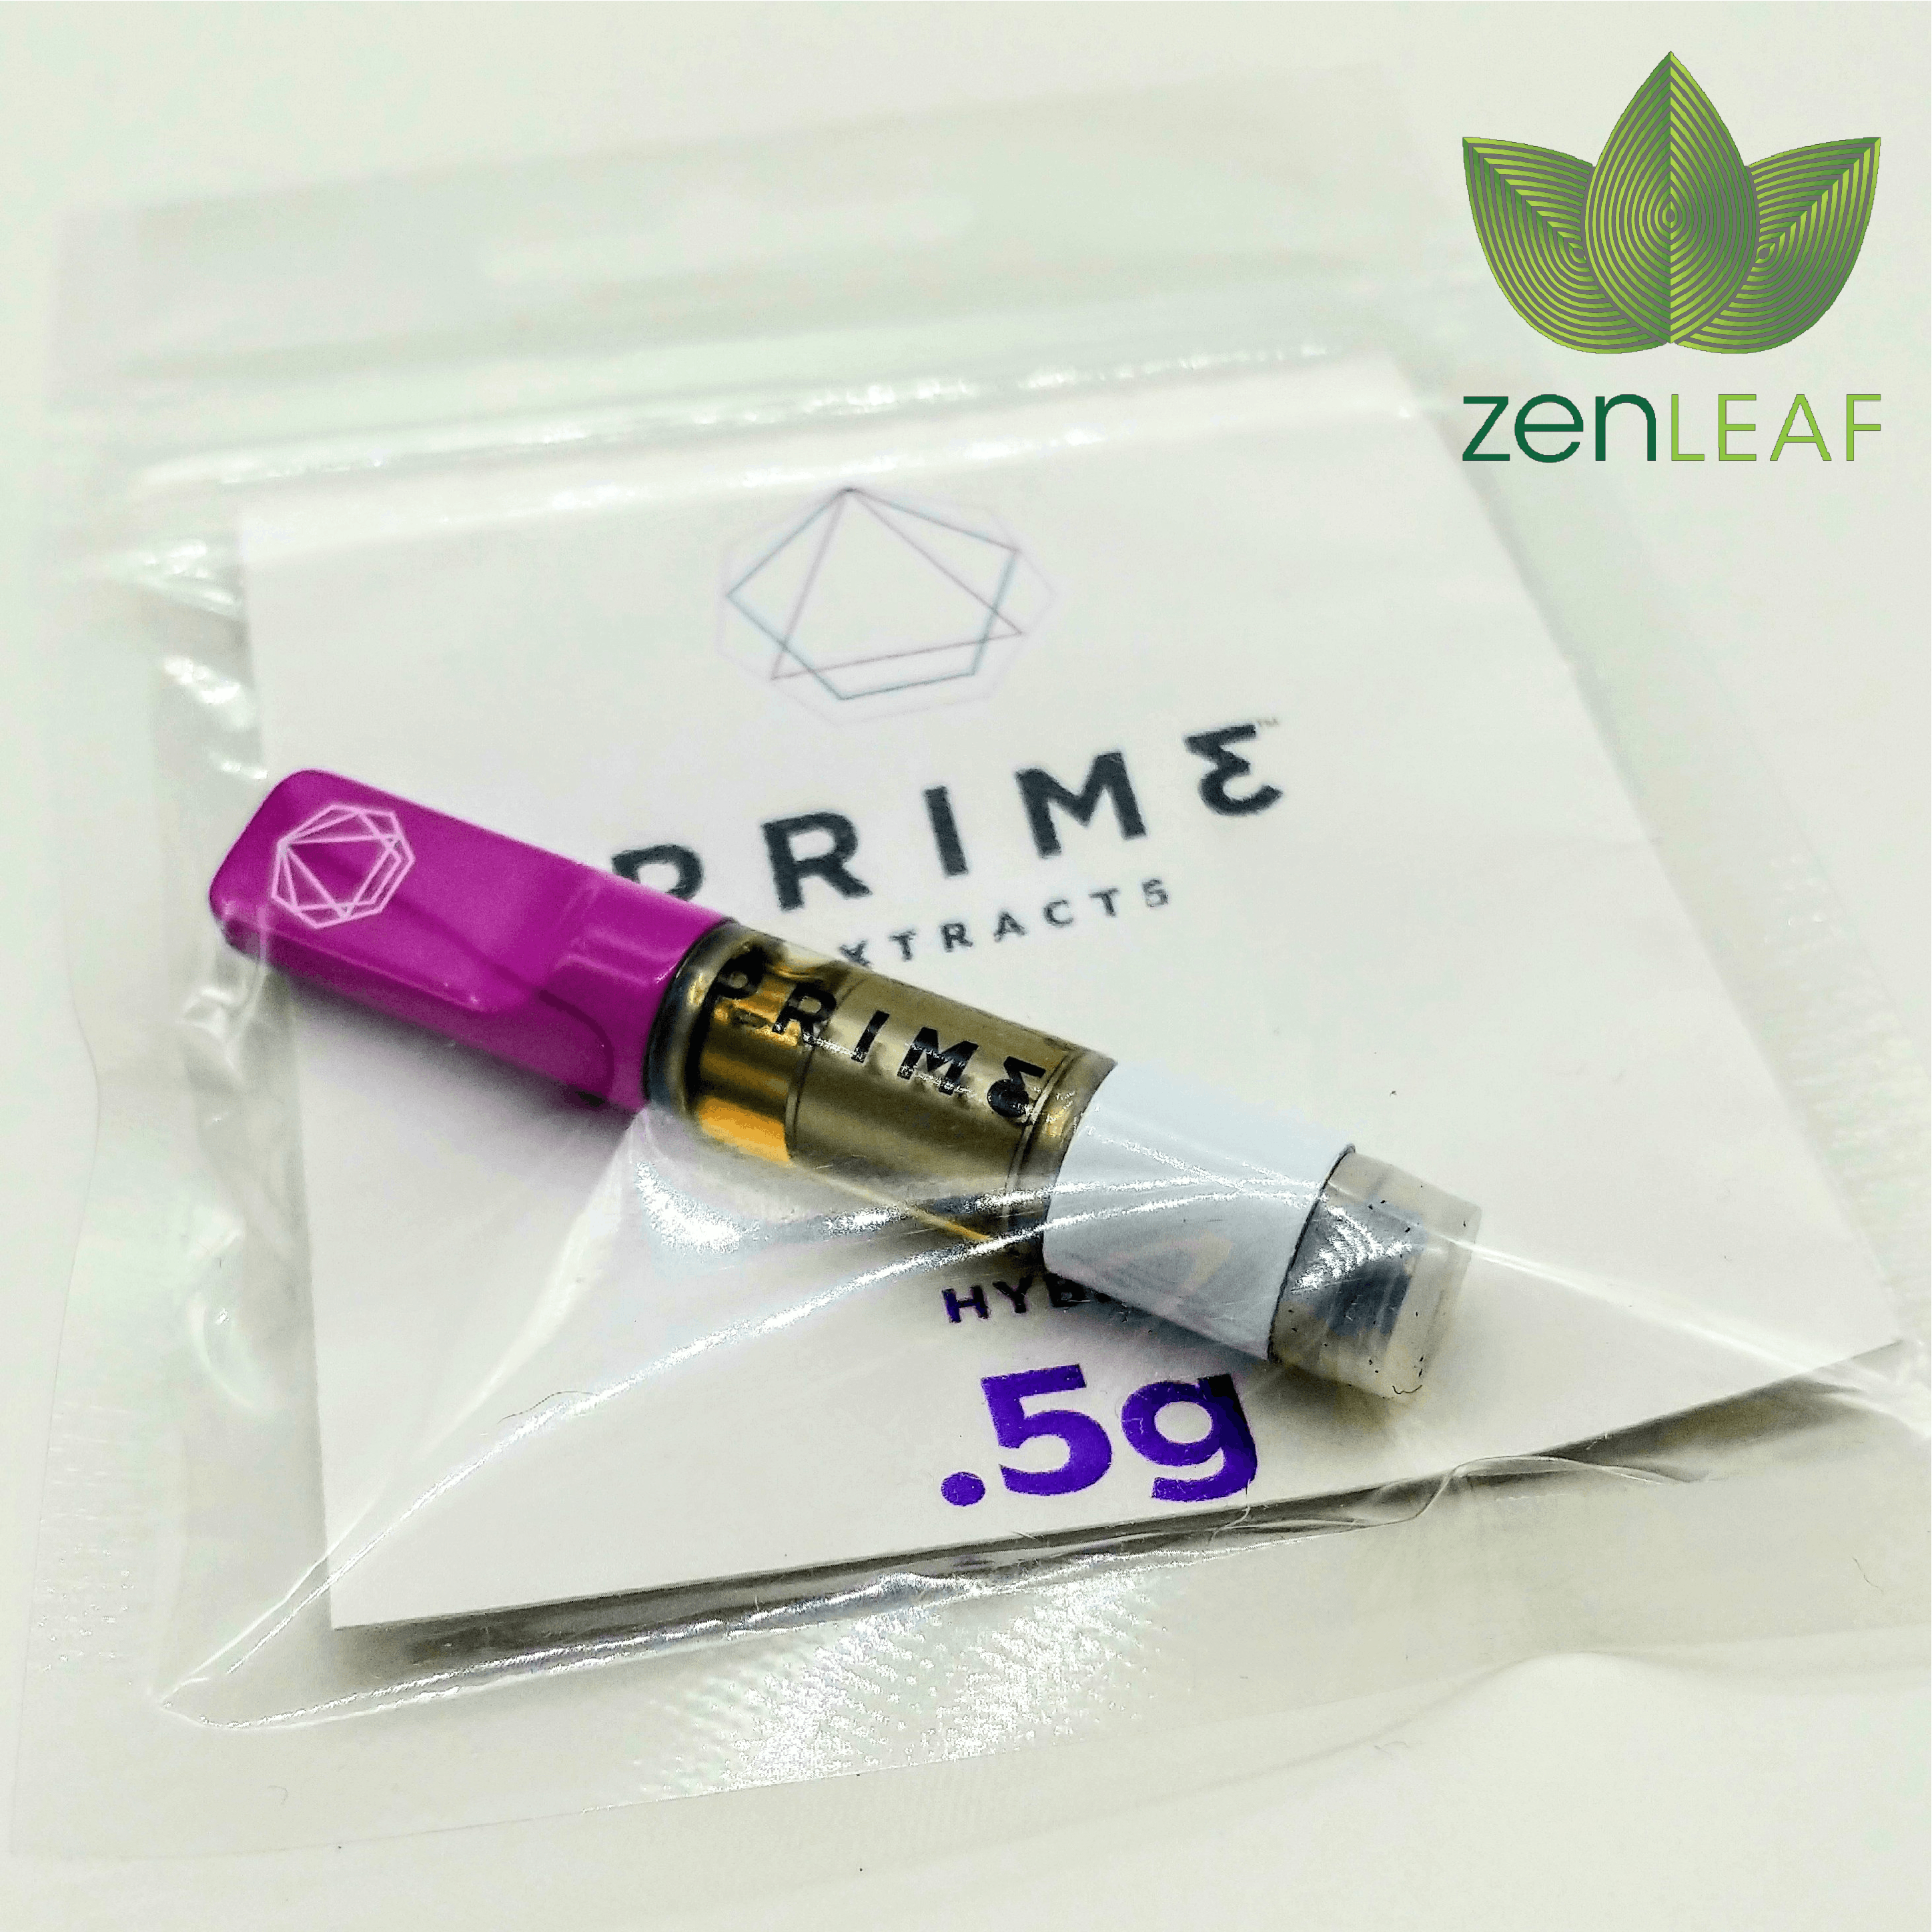 Trainwreck Cartridges by Prime Extracts